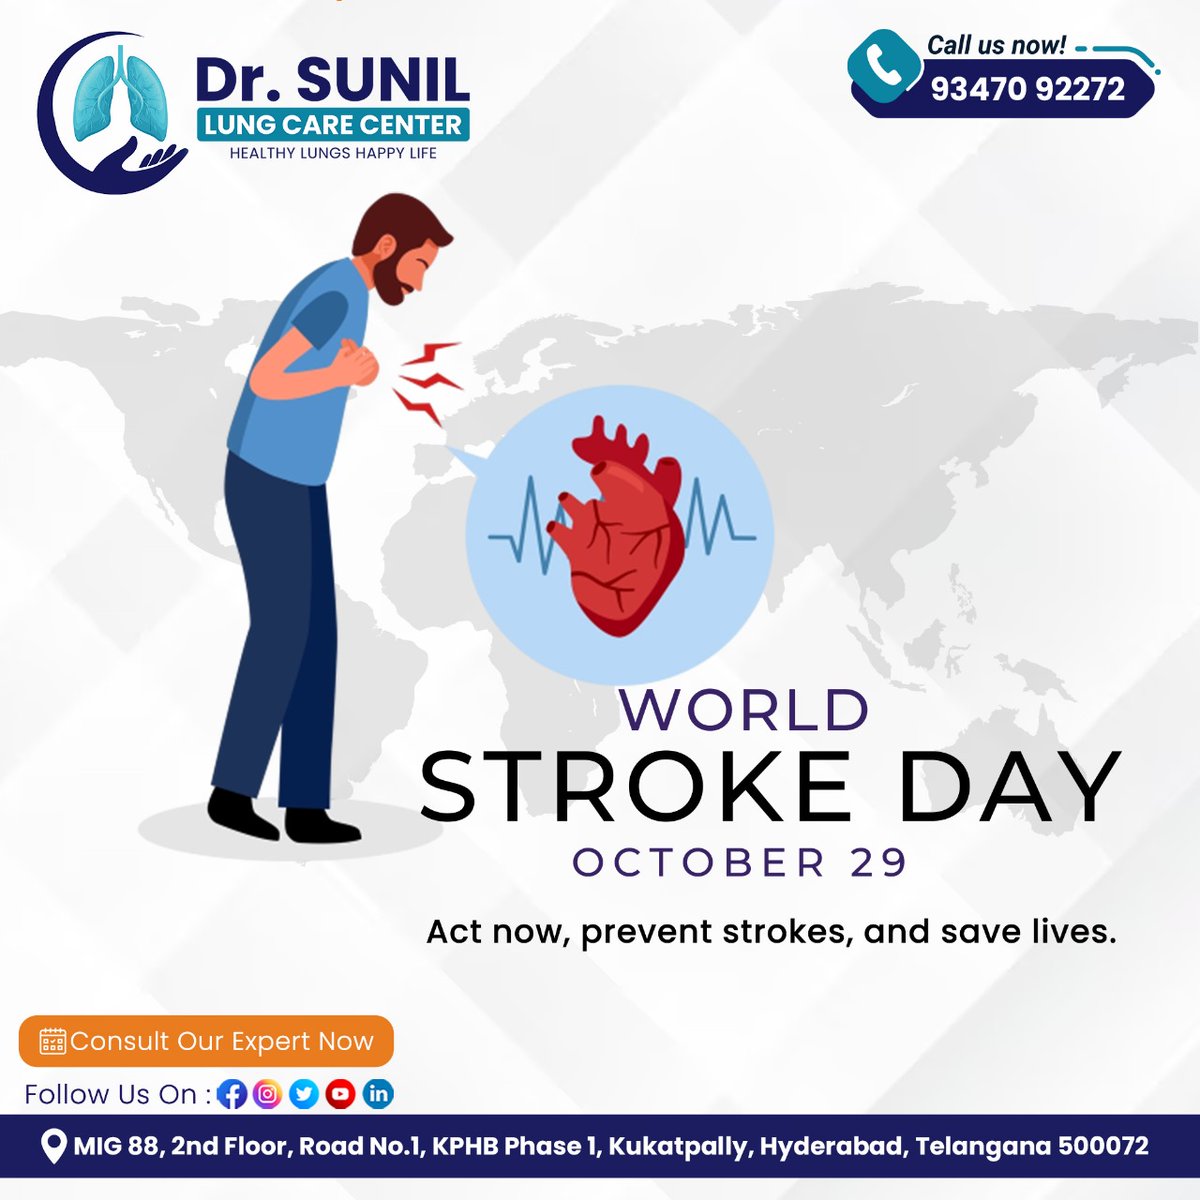 On World Stroke Day, Dr. Sunil Lung Care Center stands with you to raise awareness about stroke prevention, treatment, and recovery. Together, we can make a difference in the fight against stroke.

#DrSunilLungCareCenter #WorldStrokeDay #worldstrokeday #worldstroke #stroke